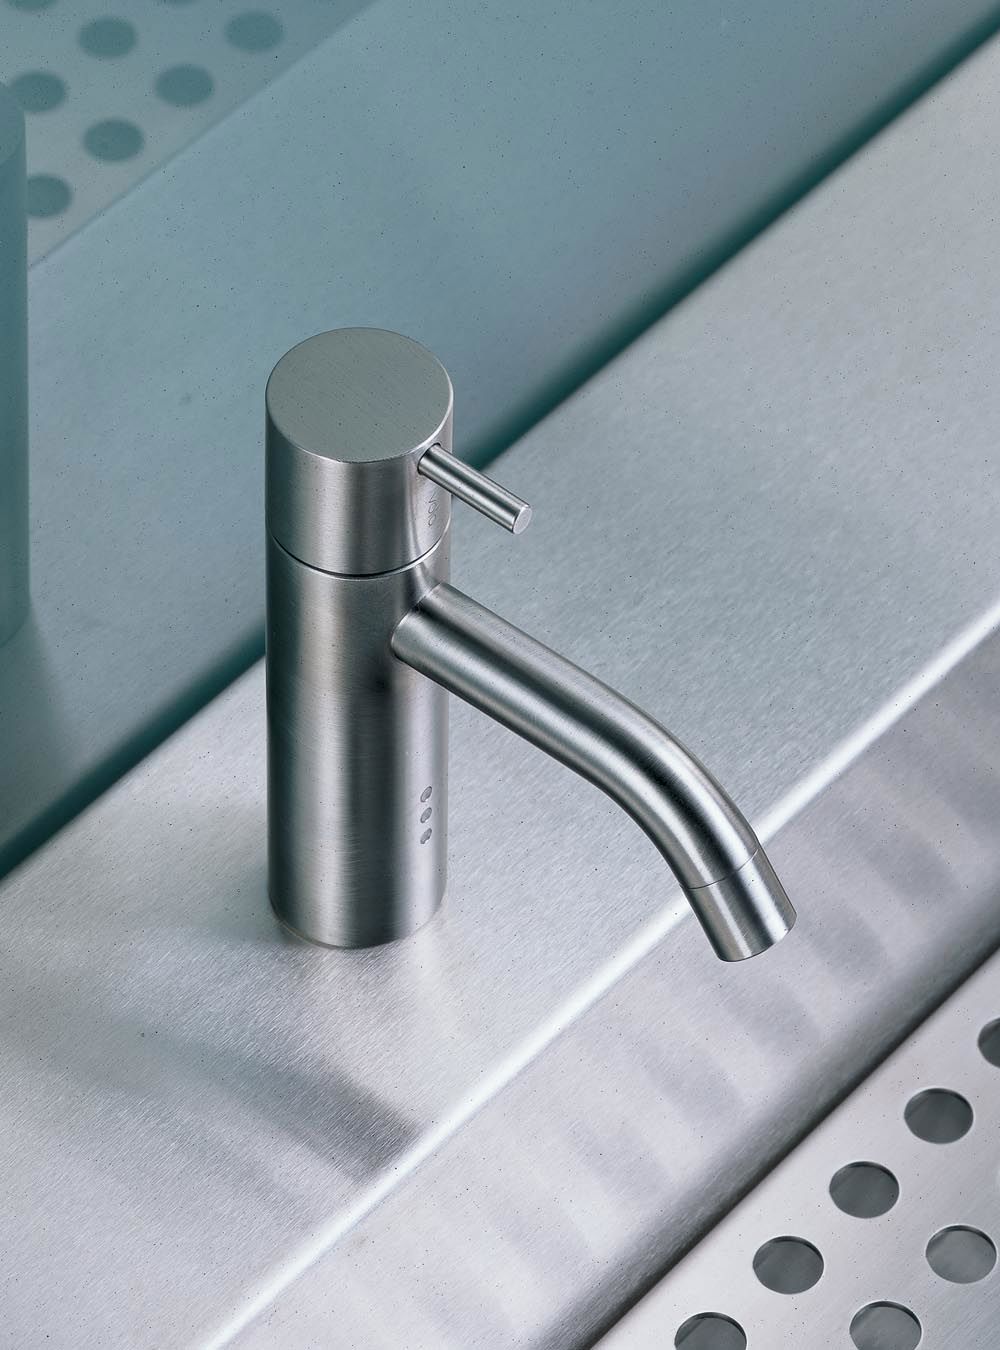 HV1EN2: Washbasin mixer with on-off sensor for ‘hands free’ operation, with peg on temperature control handl